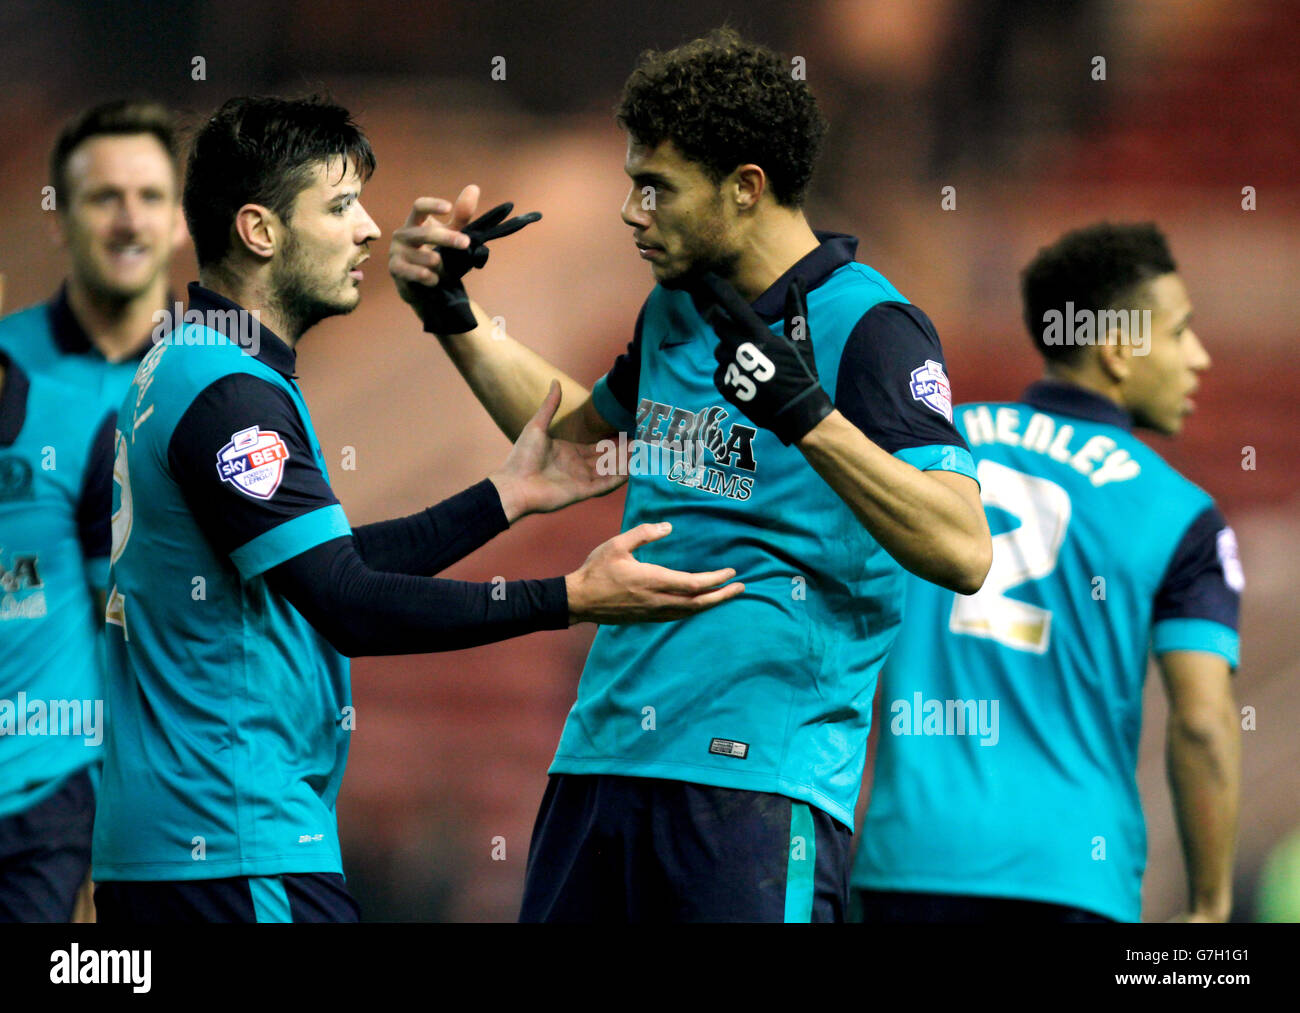 Soccer - Sky Bet Championship - Middlesbrough v Blackburn Rovers - Riverside Stadium. Blackburn's Rudy Gestede complains about racist abuse from fans after the match Stock Photo